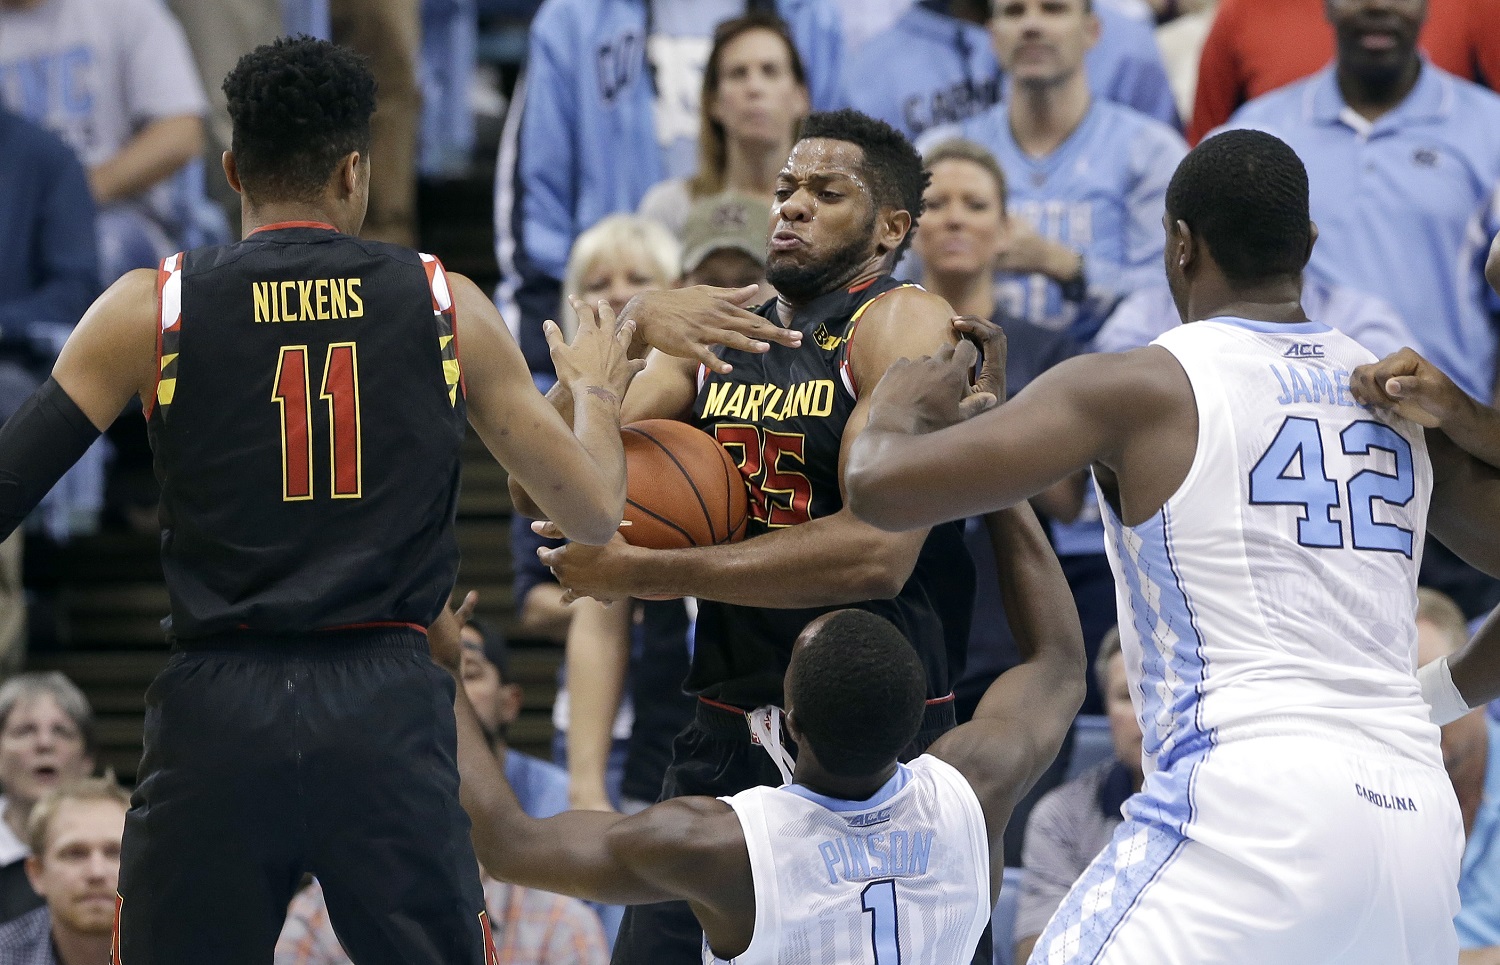 North Carolina's Theo Pinson (1) and Joel James (42) defend as Maryland's Damonte Dodd (35) and Jared Nickens (11) reach for a rebound during the first half of an NCAA college basketball game in Chapel Hill, N.C., Tuesday, Dec. 1, 2015. (AP Photo/Gerry Broome)